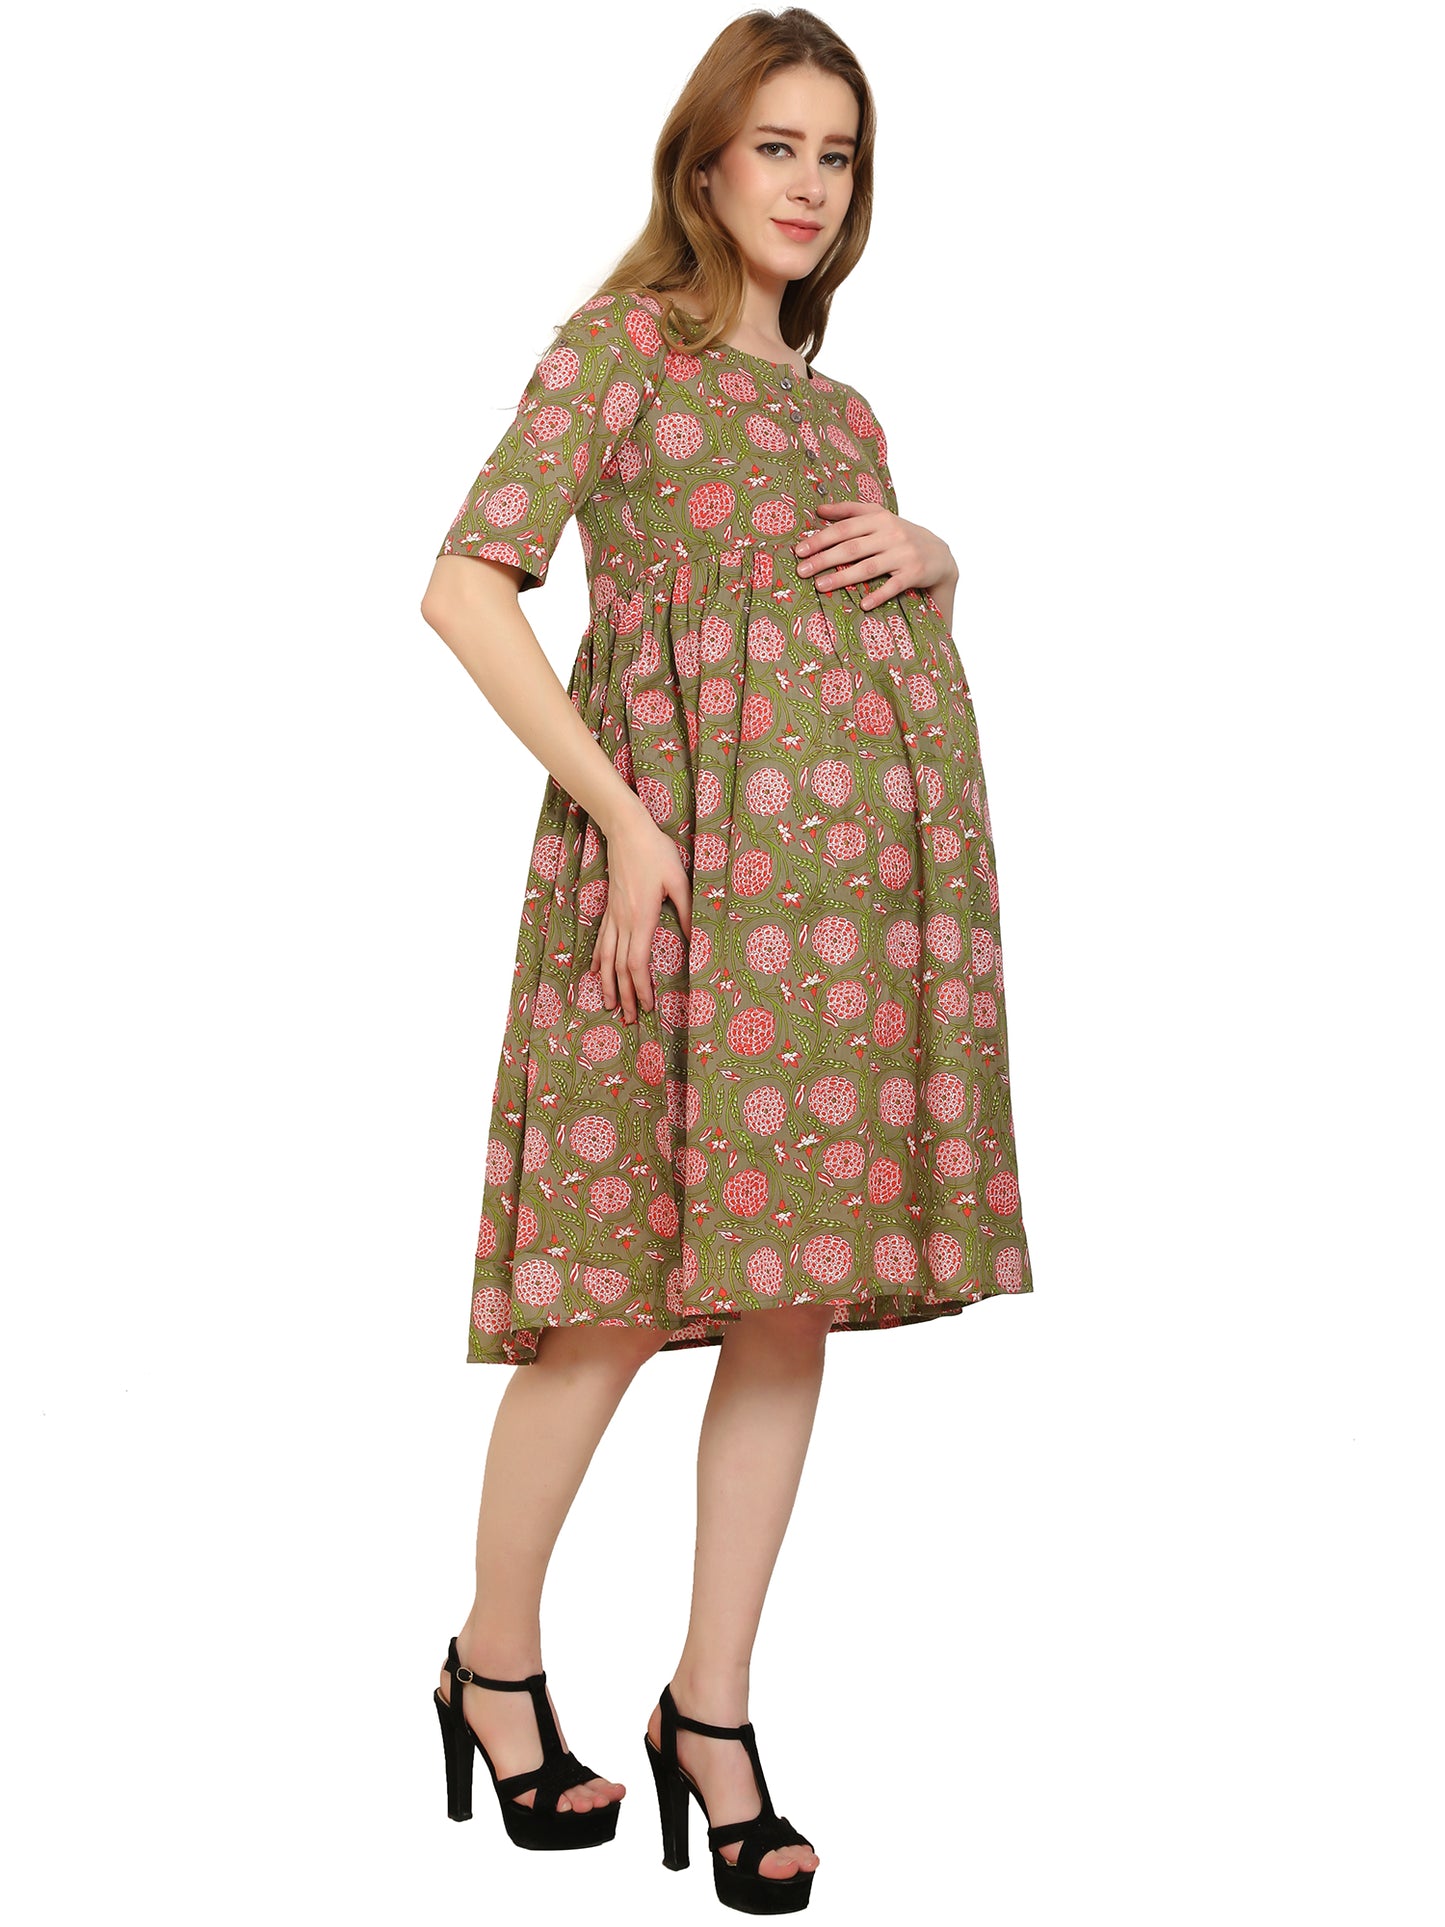 Maternity Dress | Pure Cotton | Brown Color Printed Dress | Feeding Dress | Pre and Post Pregnancy